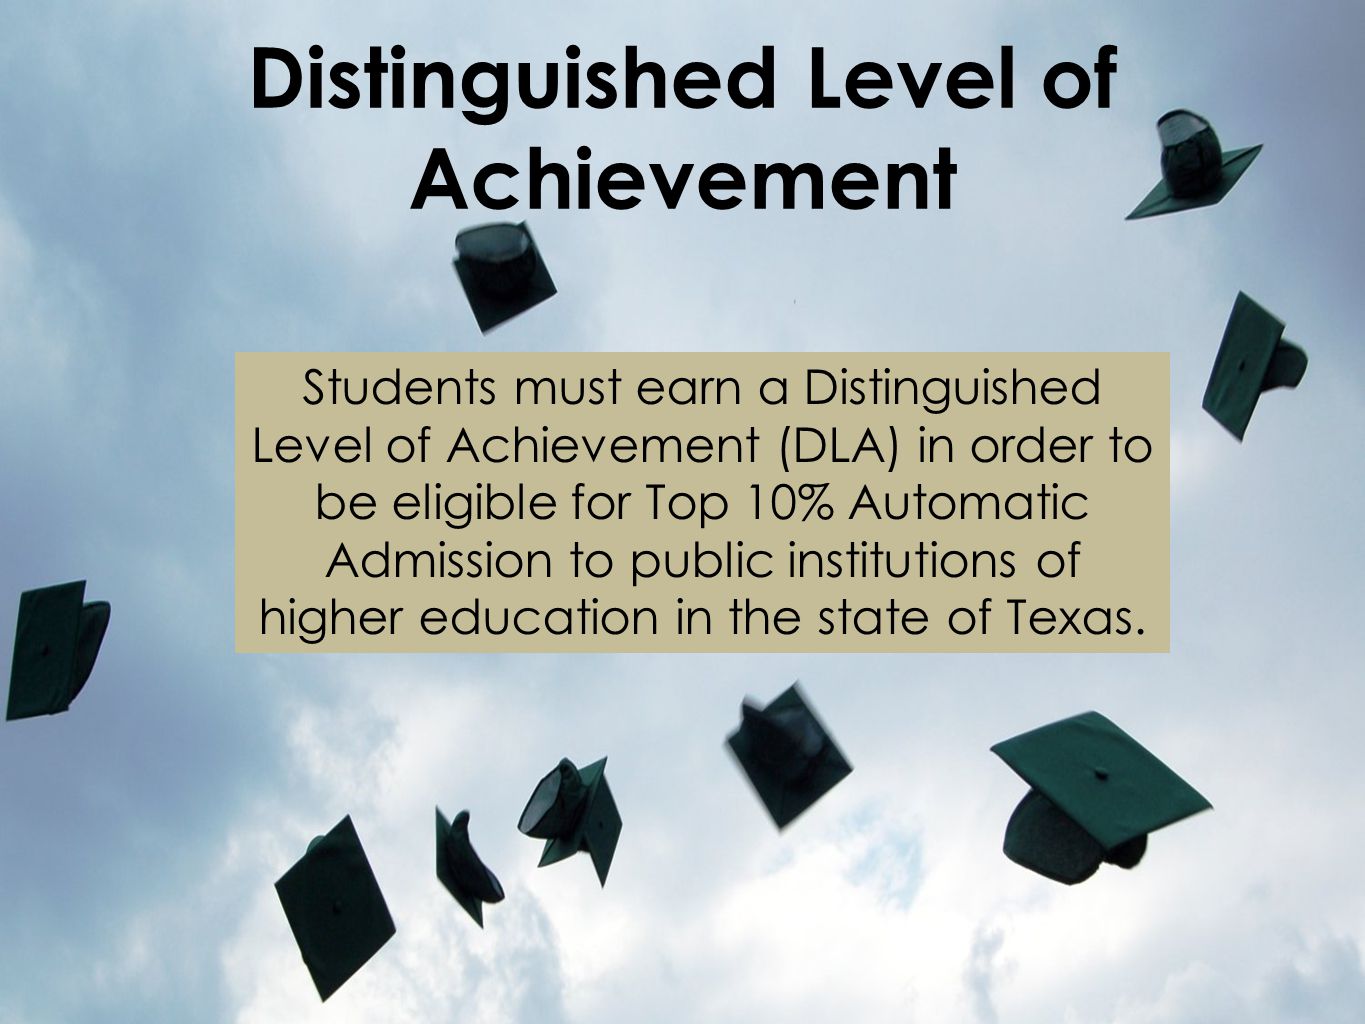 Distinguished Level of Achievement Students must earn a Distinguished Level of Achievement (DLA) in order to be eligible for Top 10% Automatic Admission to public institutions of higher education in the state of Texas.